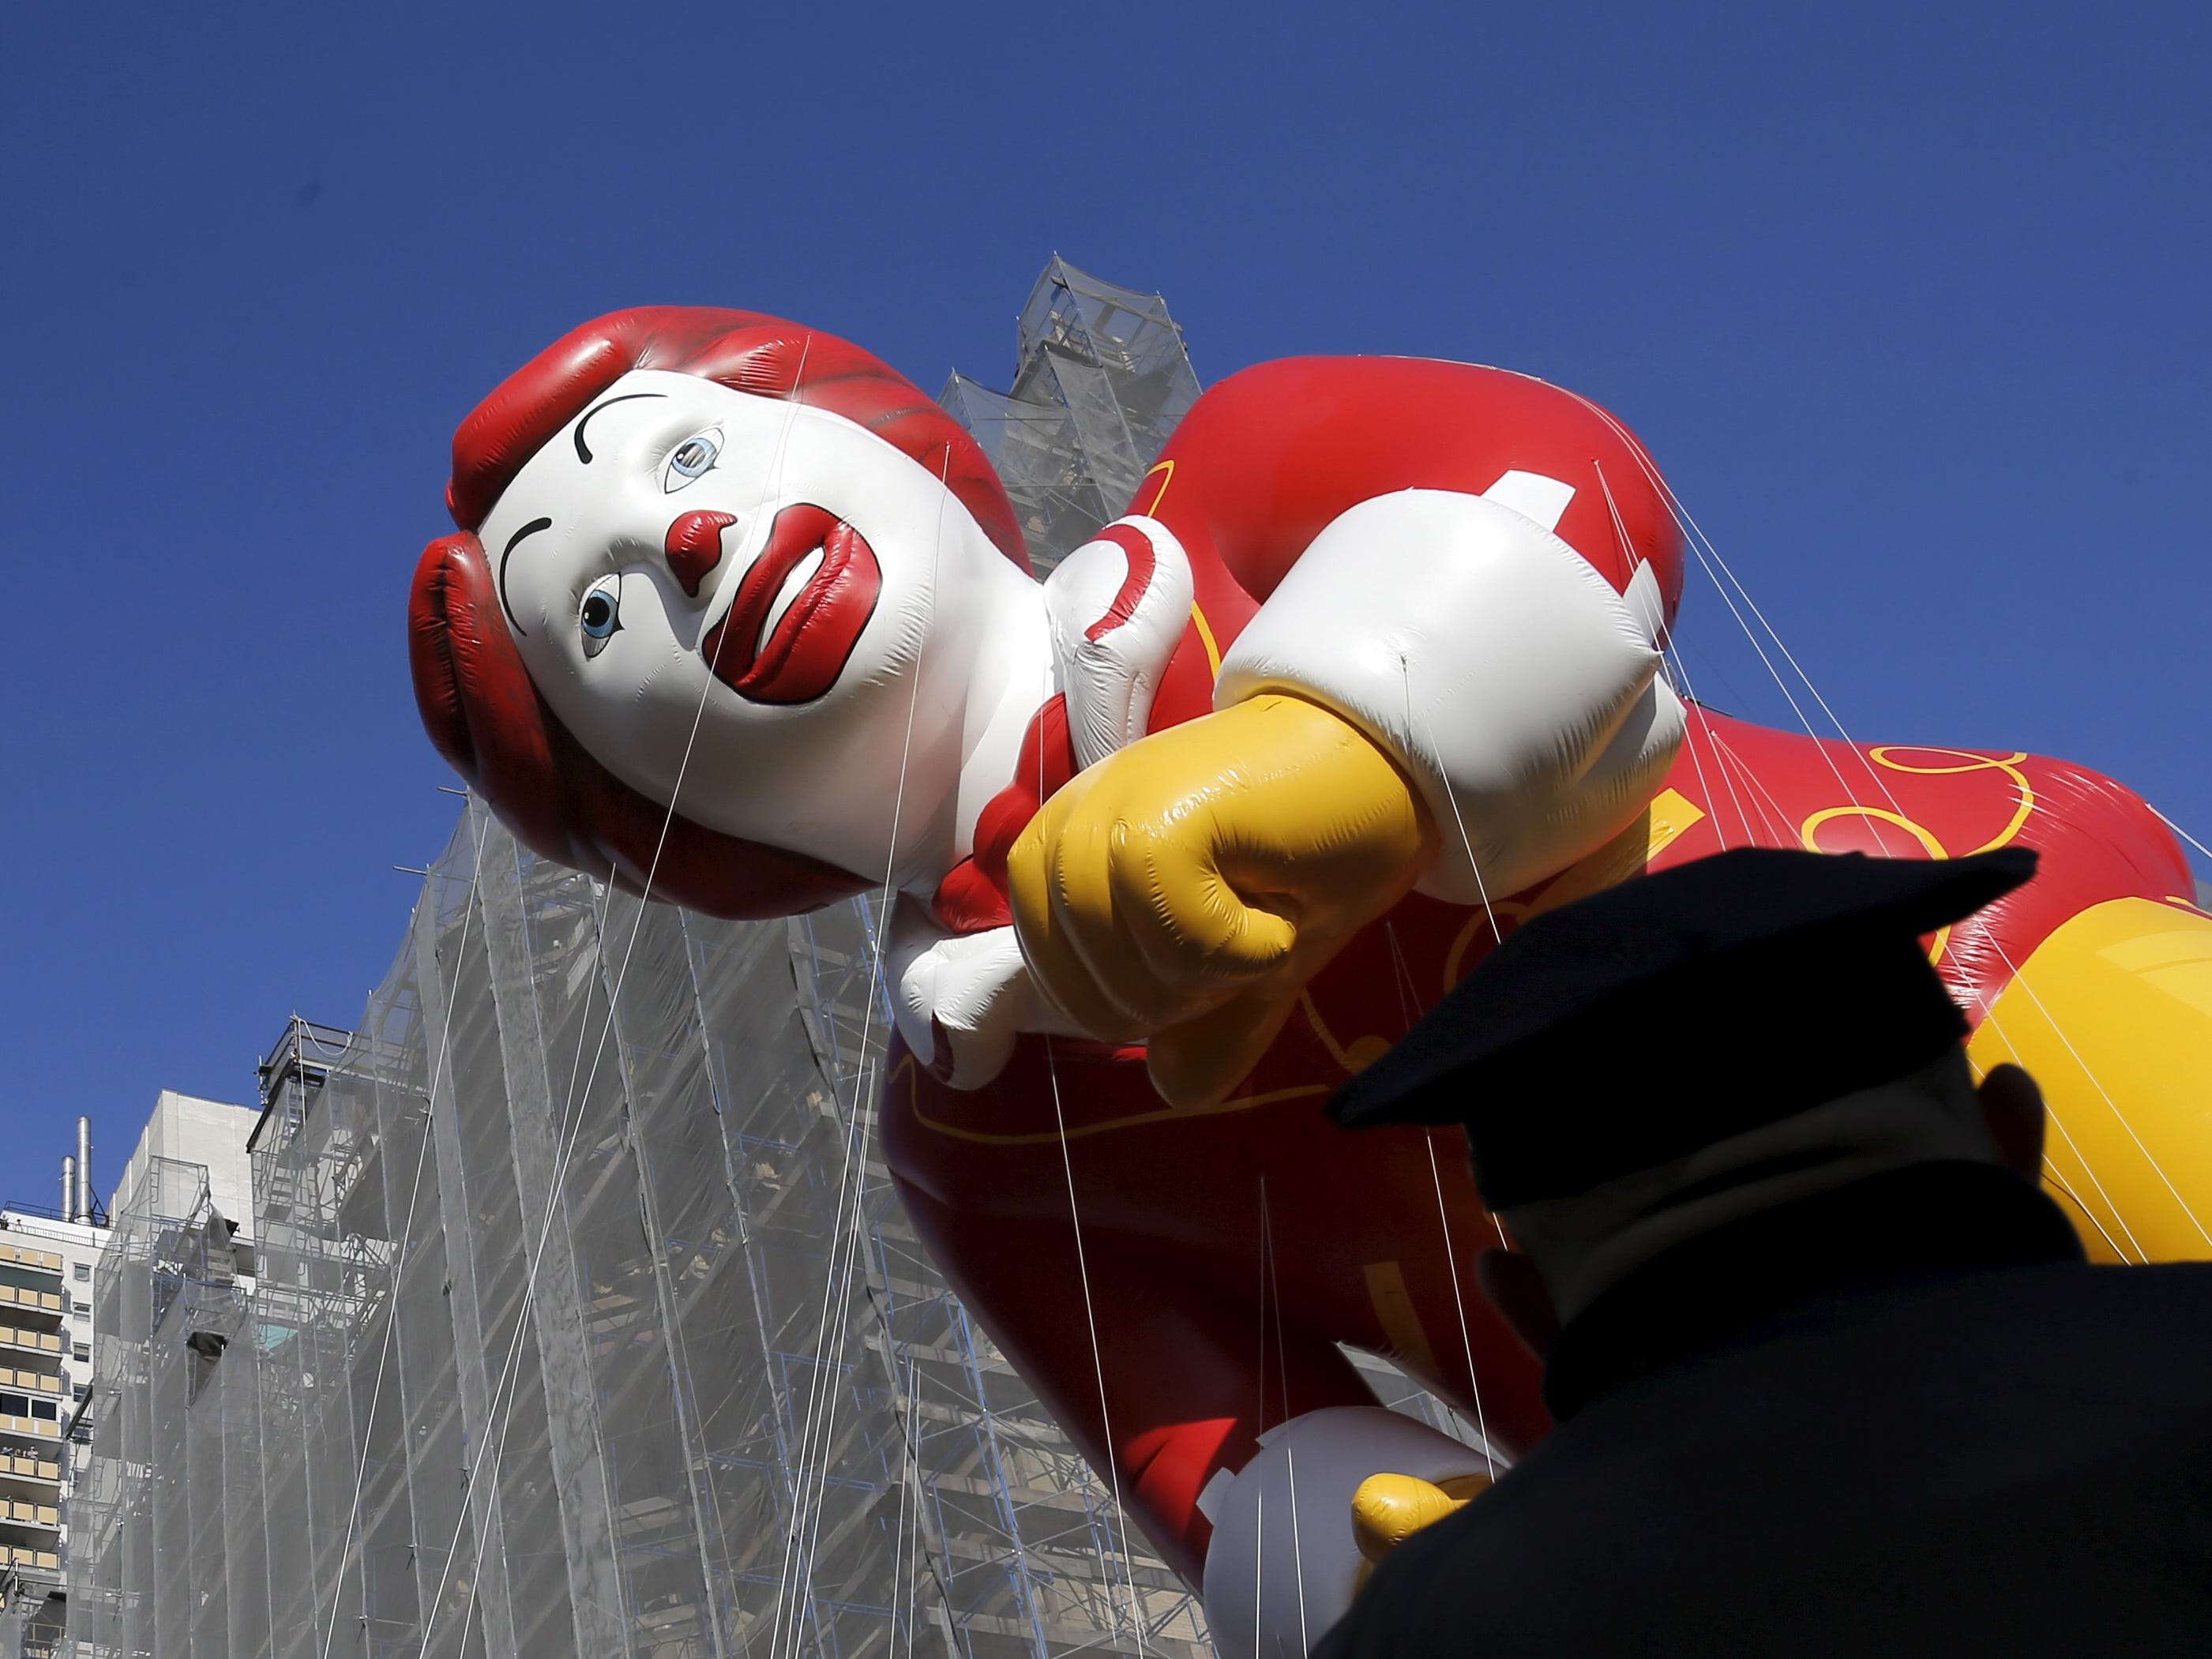 McDonalds slammed with 3 new sexual-harassment lawsuits as workers say the fast-food giant failed to protect them on the job Business Insider India pic